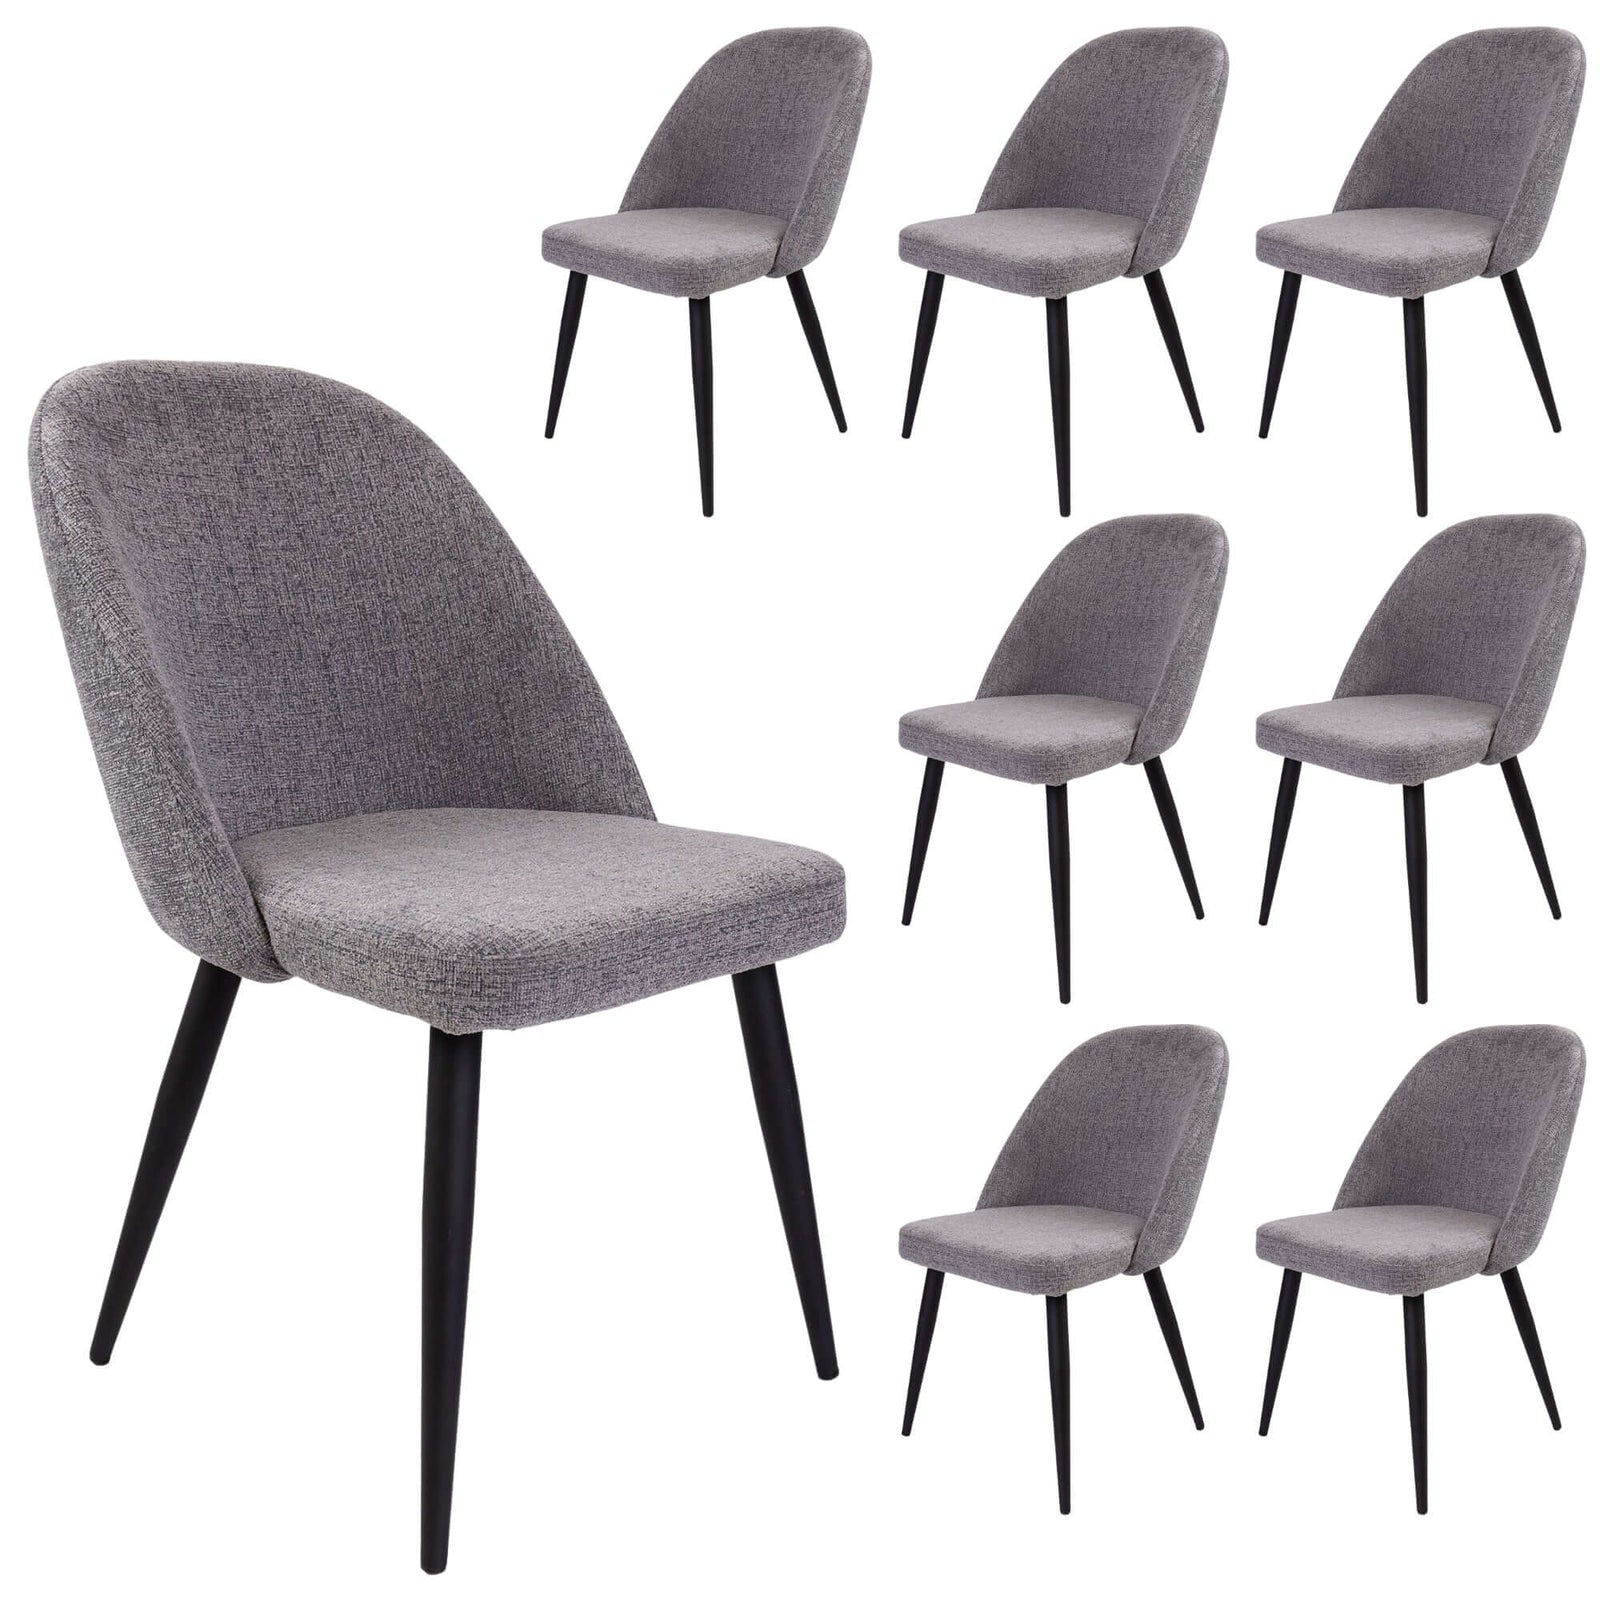 Erin Dining Chair Set of 8 Fabric Seat with Metal Frame - Fog-Upinteriors